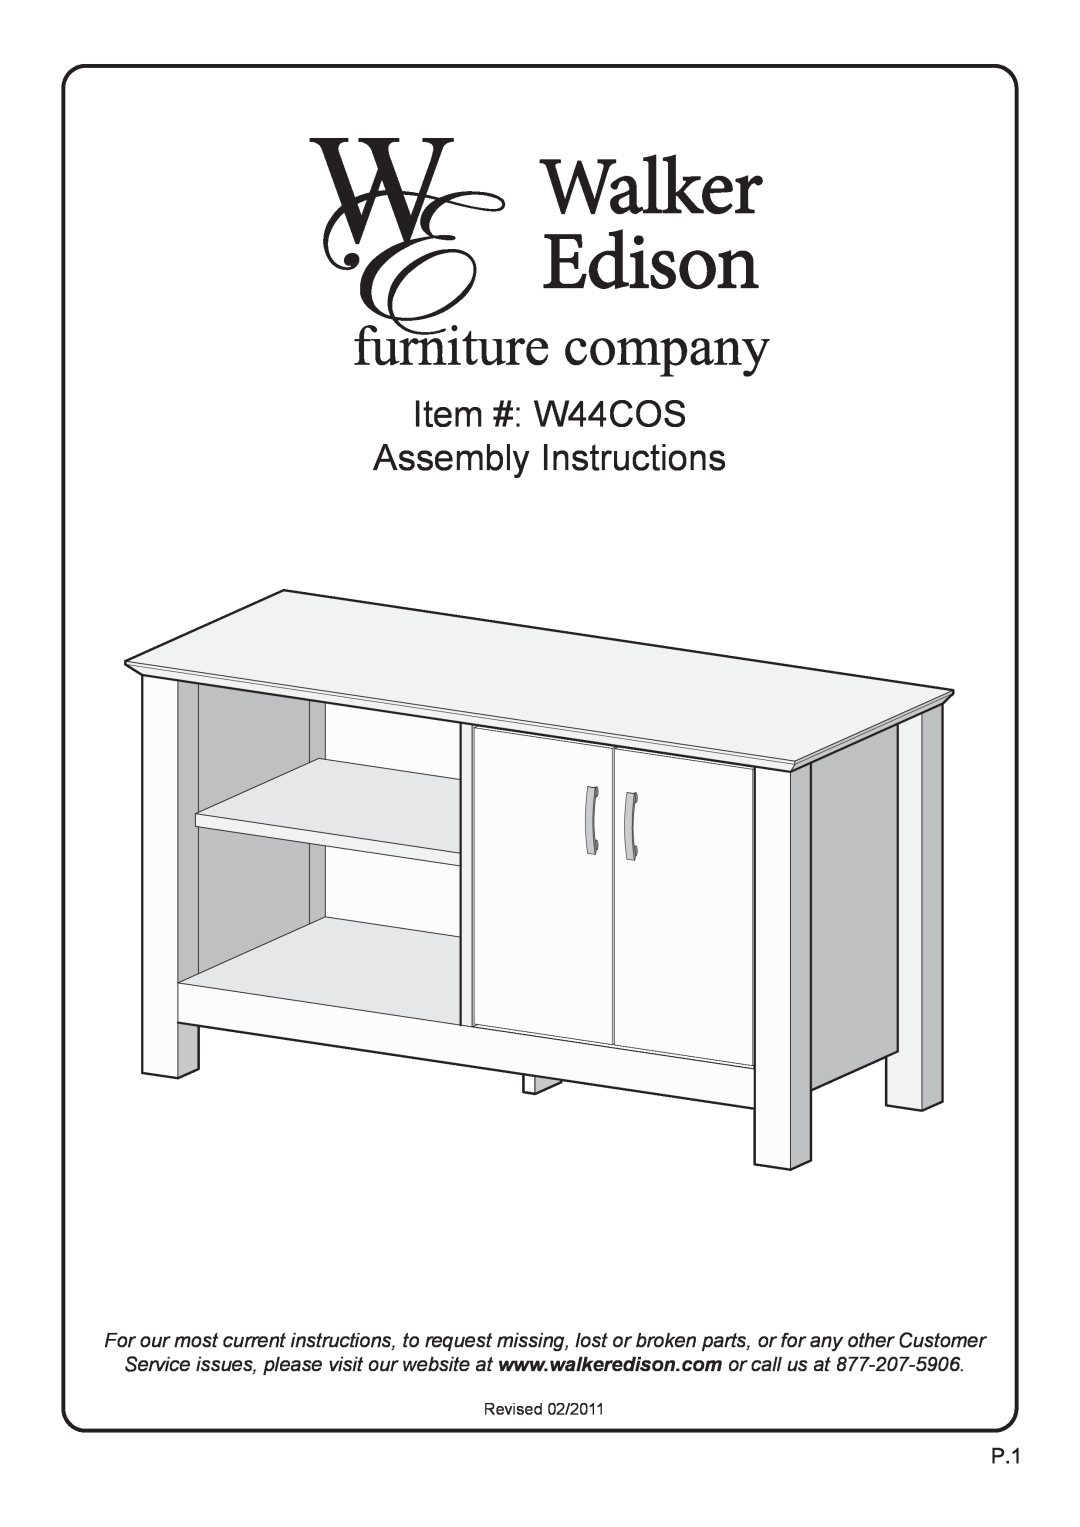 Walker W44COSBL manual Item # W44COS Assembly Instructions, Revised 02/2011 